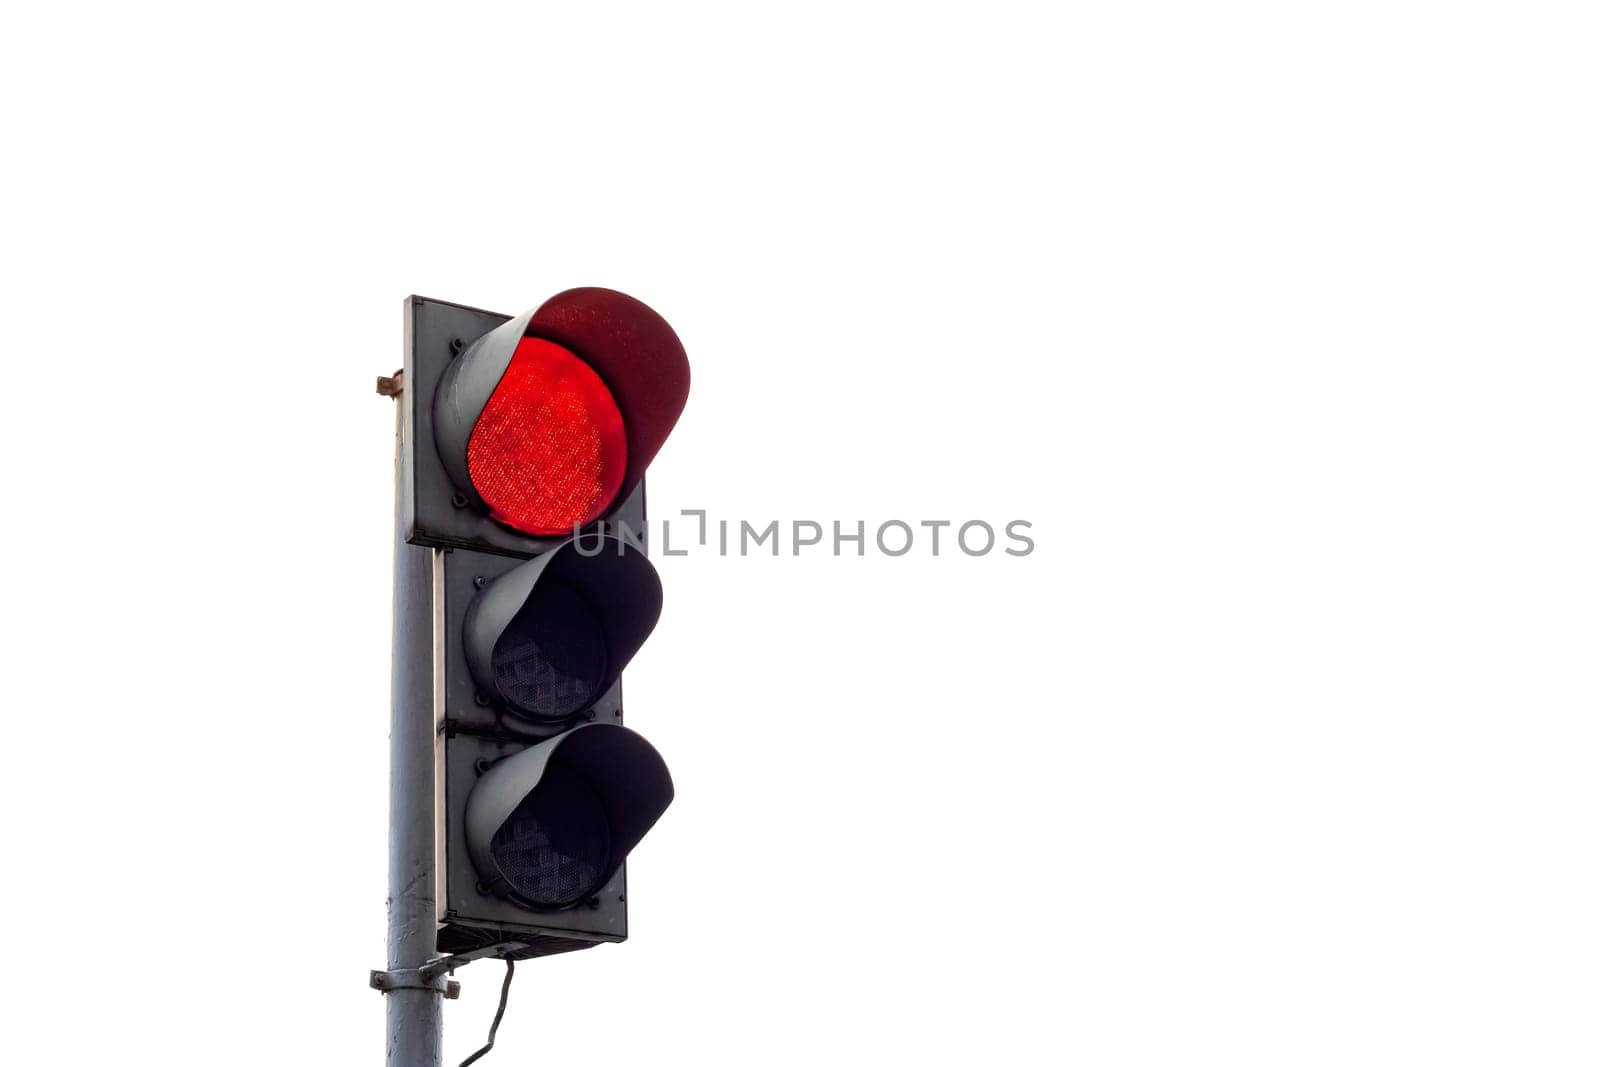 Red traffic light close up, isolated on white background